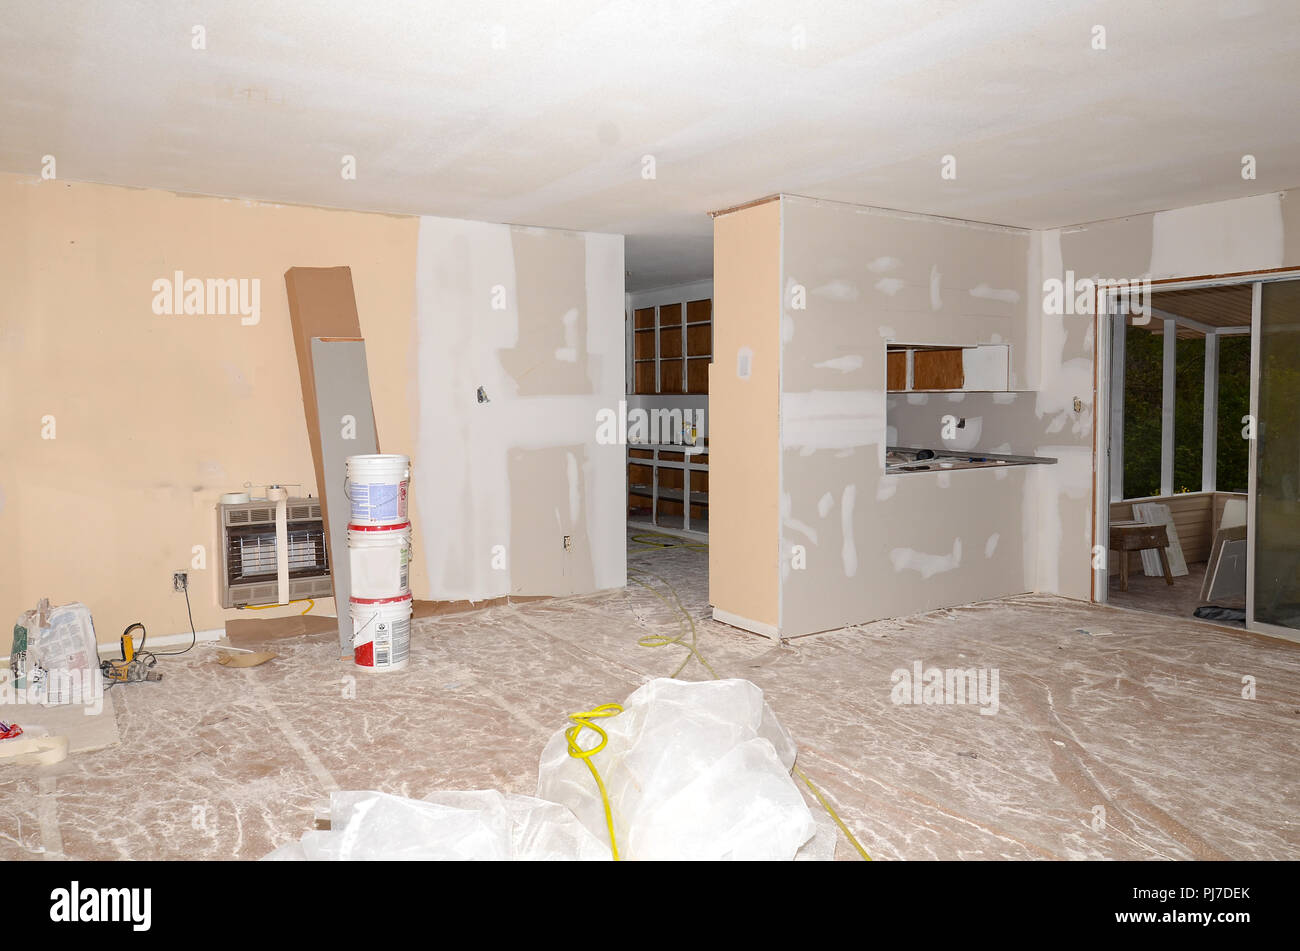 Interior of a house showing great room and kitchen areas being remodeled. Stock Photo